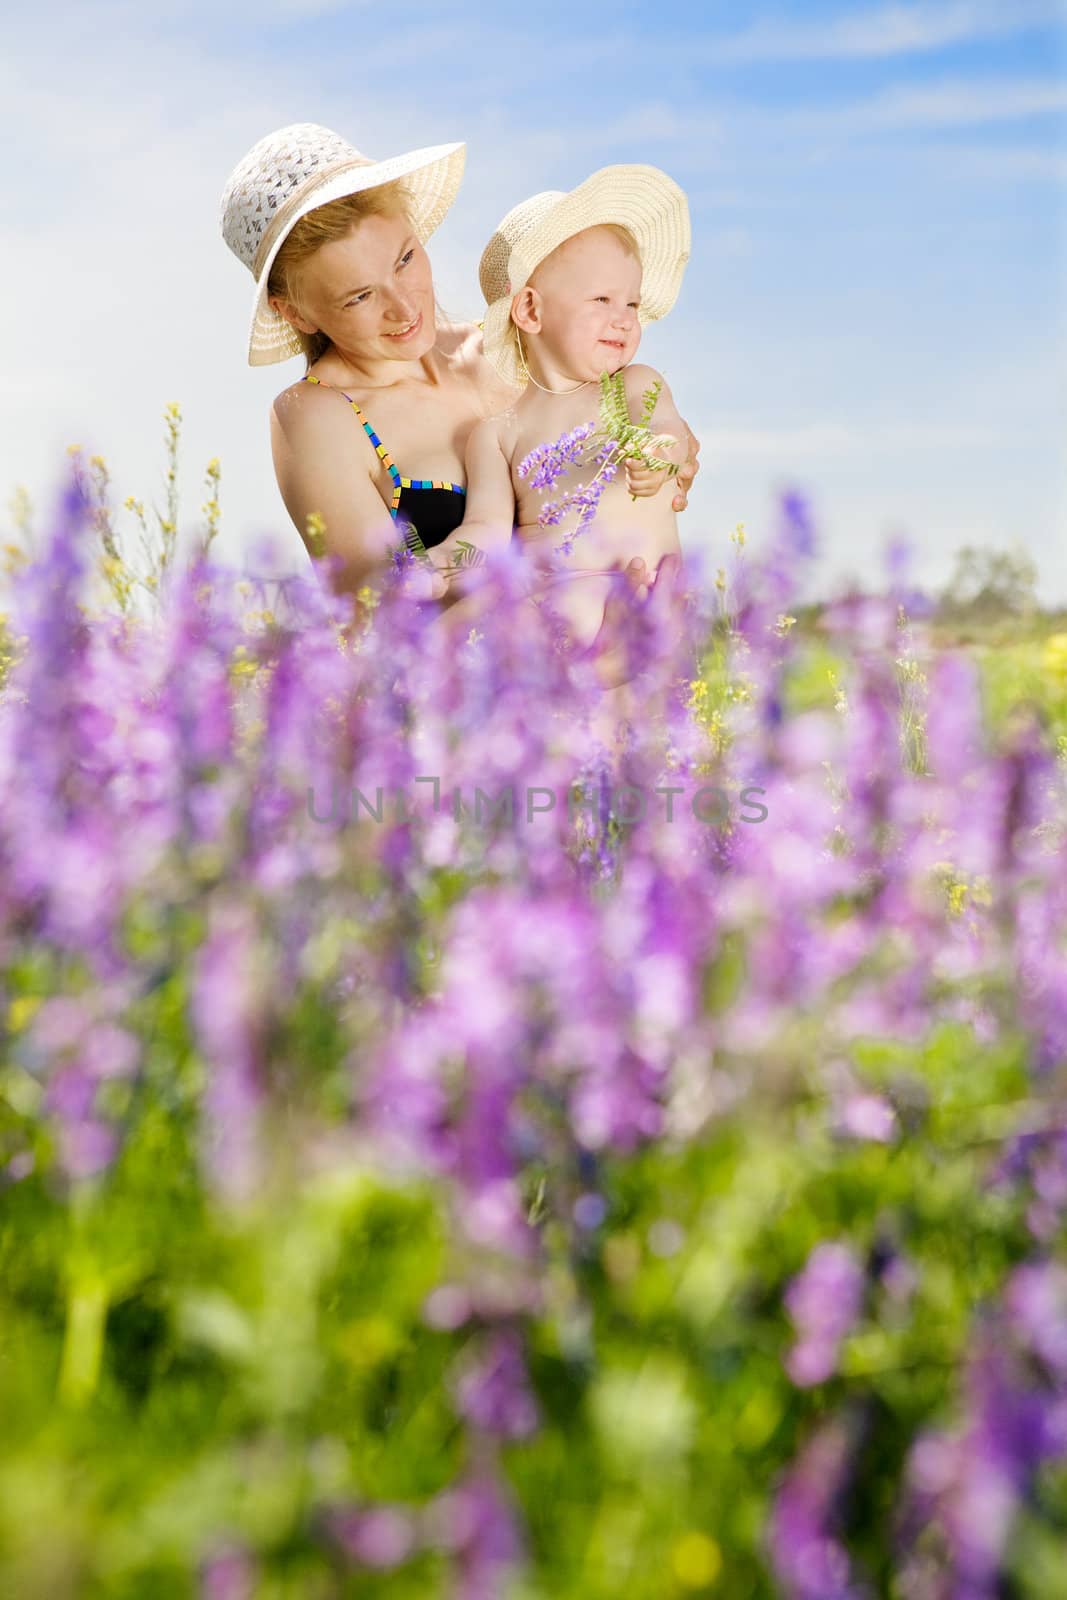 mom and daughter with flowers by vsurkov